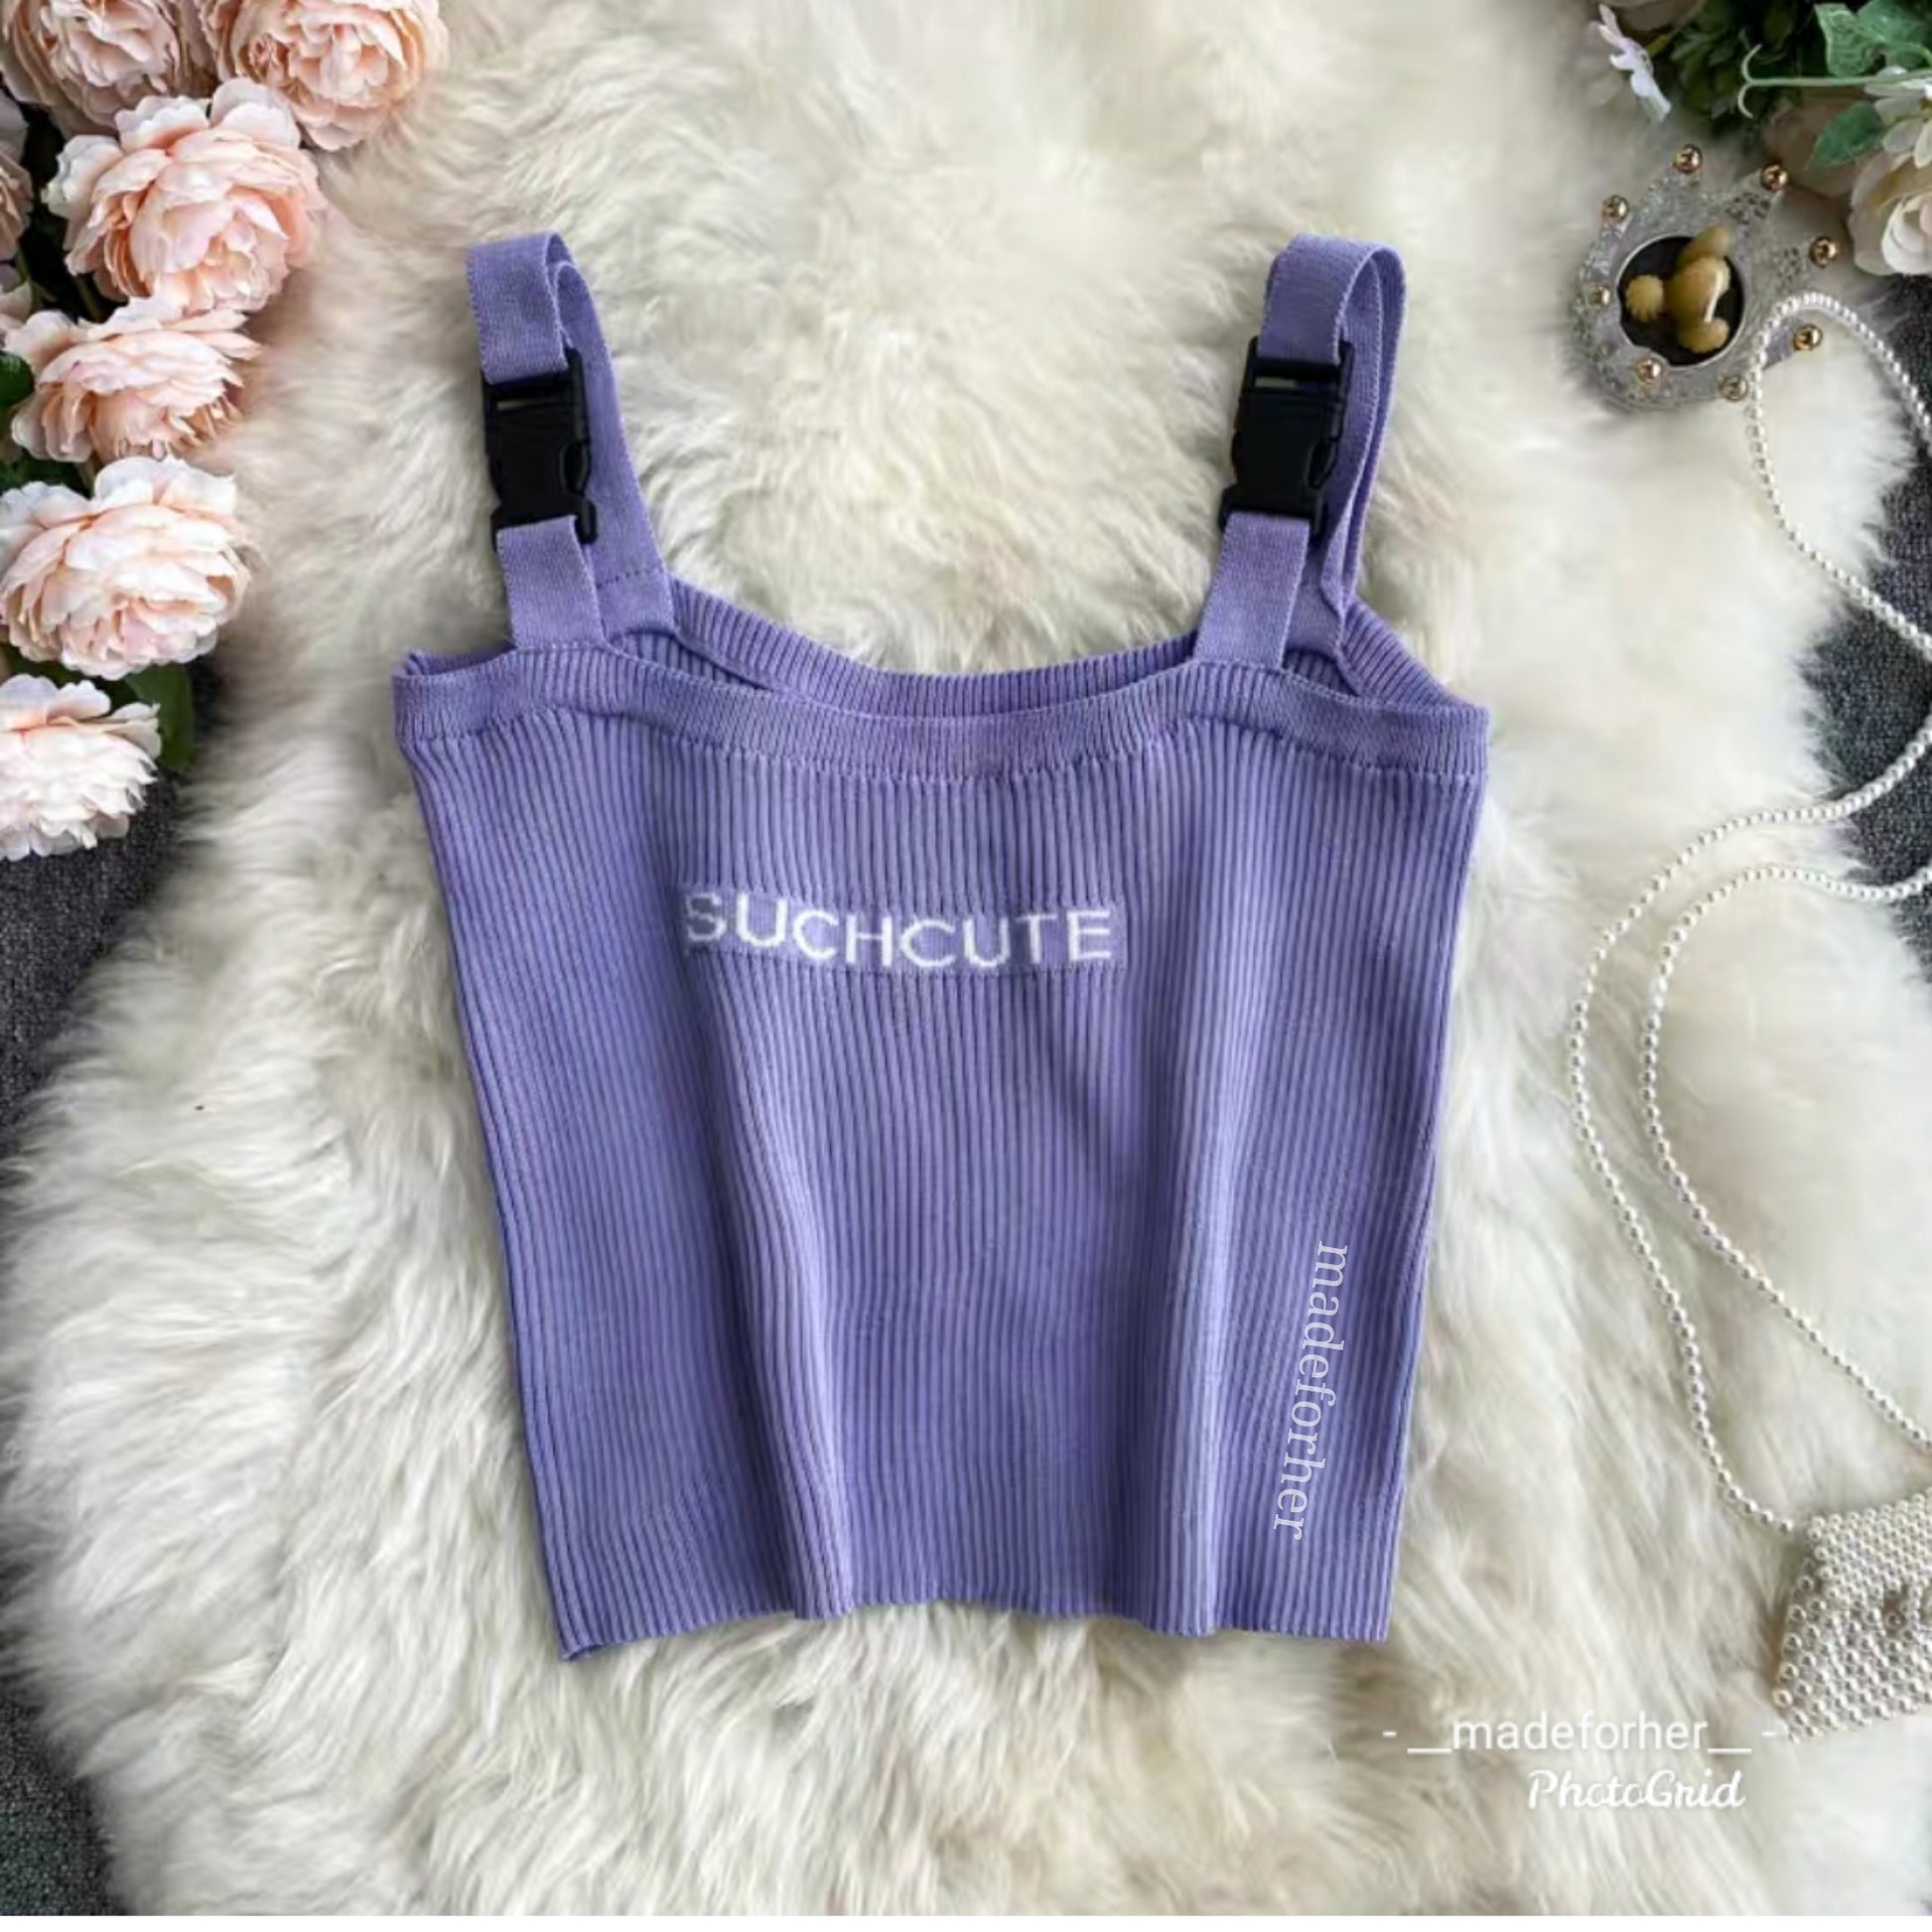 Lil Such Cute Cami top - Made For Her Label